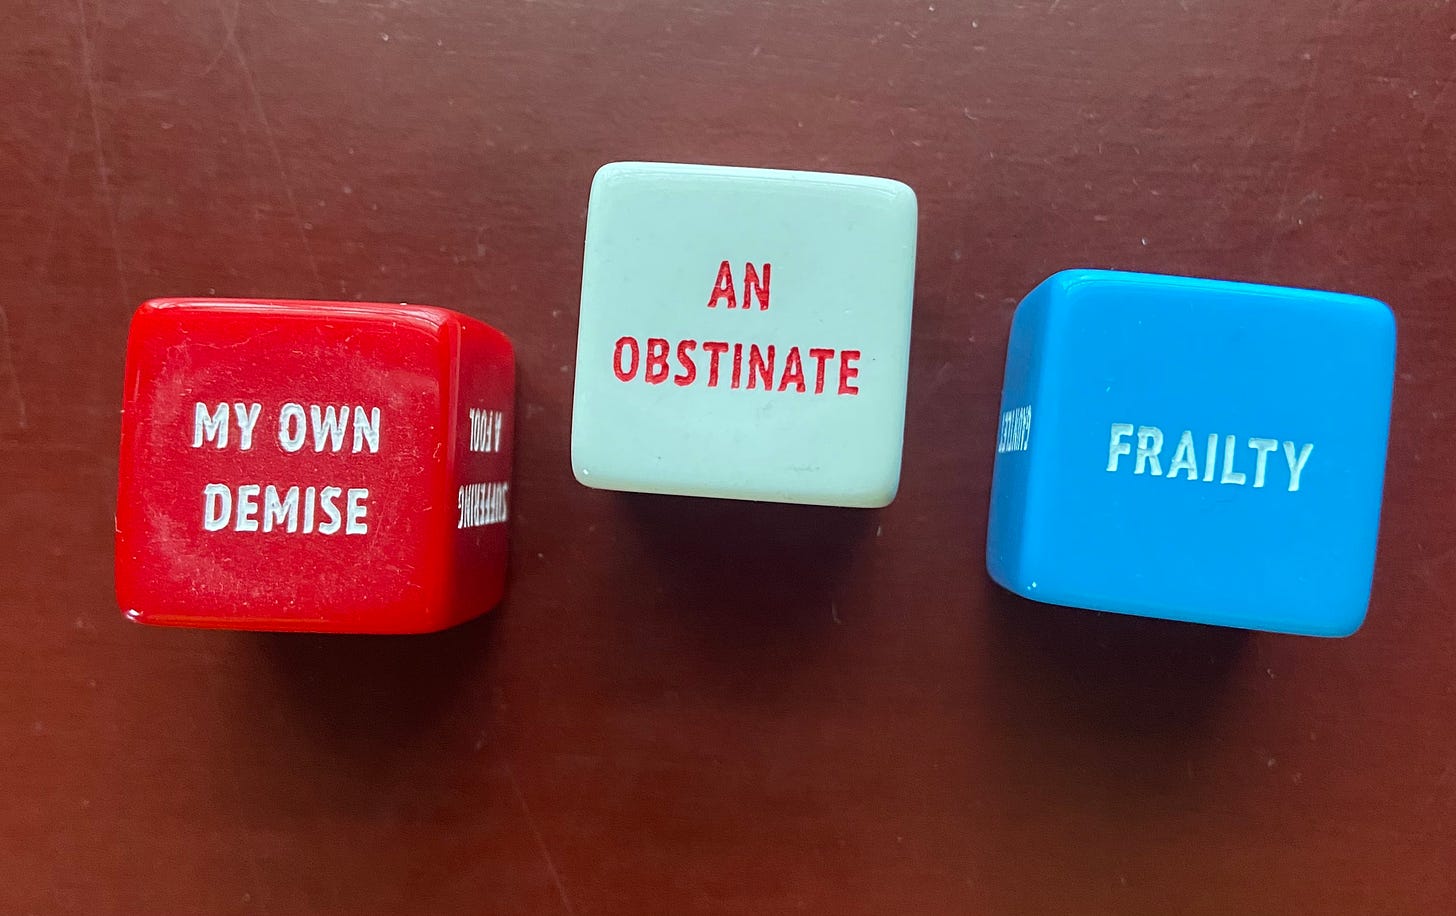 Red dice says: MY OWN DEMISE, white dice says: AN OBSTINATE, and blue dice says, FRAILITY